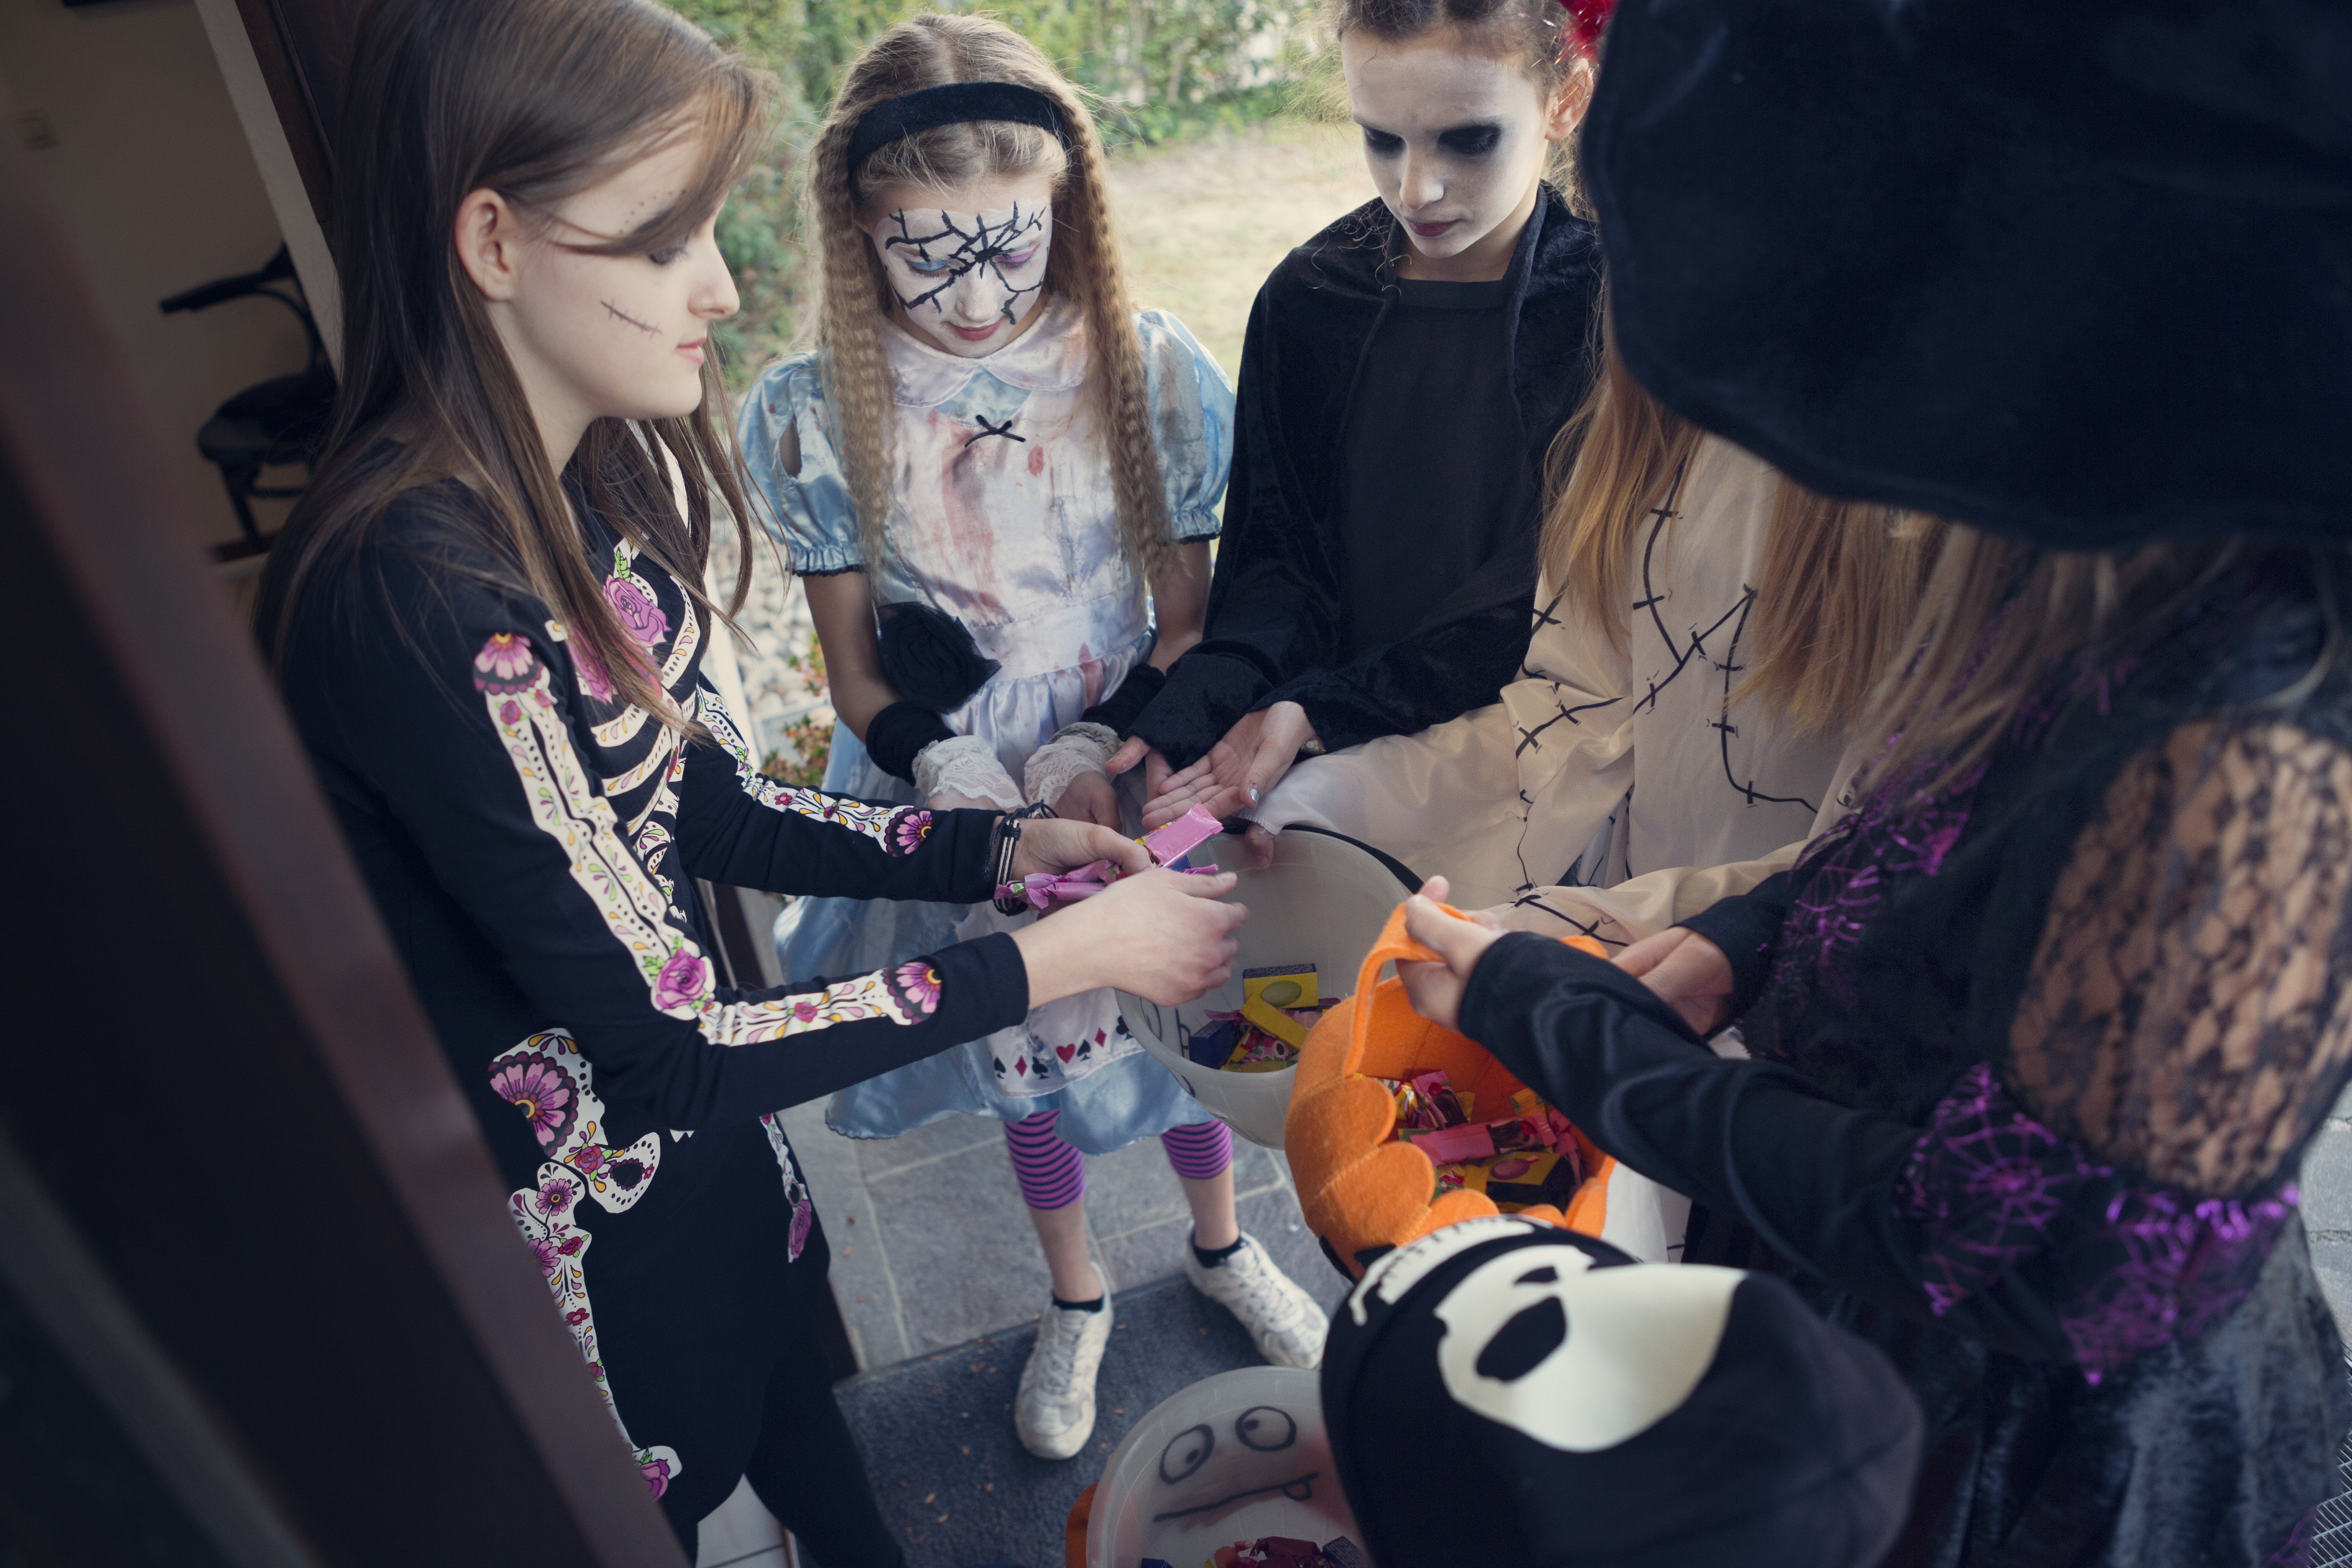 Group of girls trick or treating on Halloween